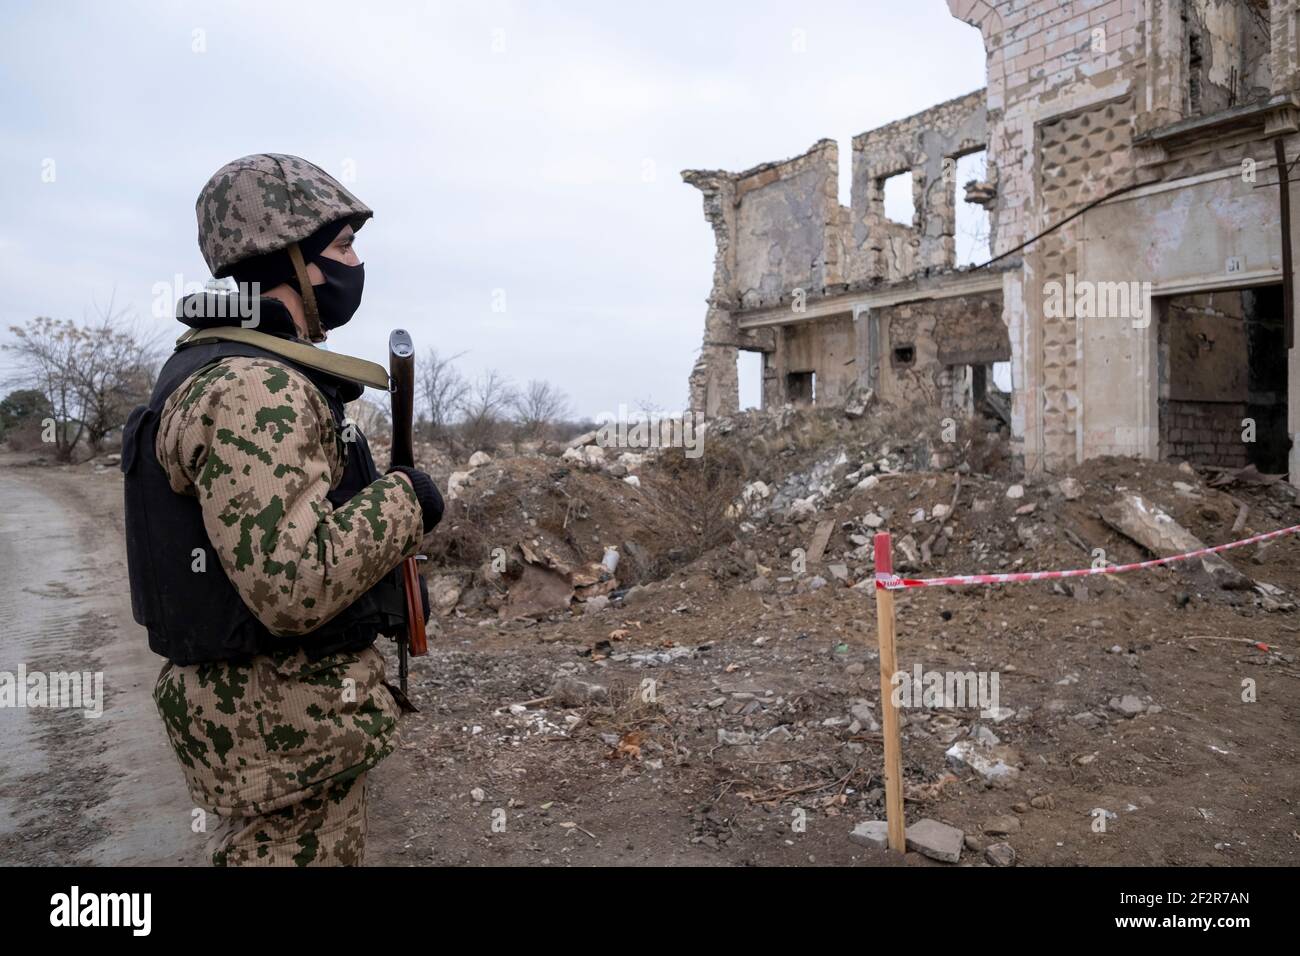 AGDAM, AZERBAIJAN - DECEMBER 14: Azerbaijani soldier looking at a ruined building in the town of Agdam which was destroyed by Armenian forces during the First Nagorno-Karabakh War on December 14, 2020 in Agdam, Azerbaijan. The town and its surrounding district were returned to Azerbaijani control as part of an agreement that ended the 2020 Nagorno-Karabakh War. Stock Photo